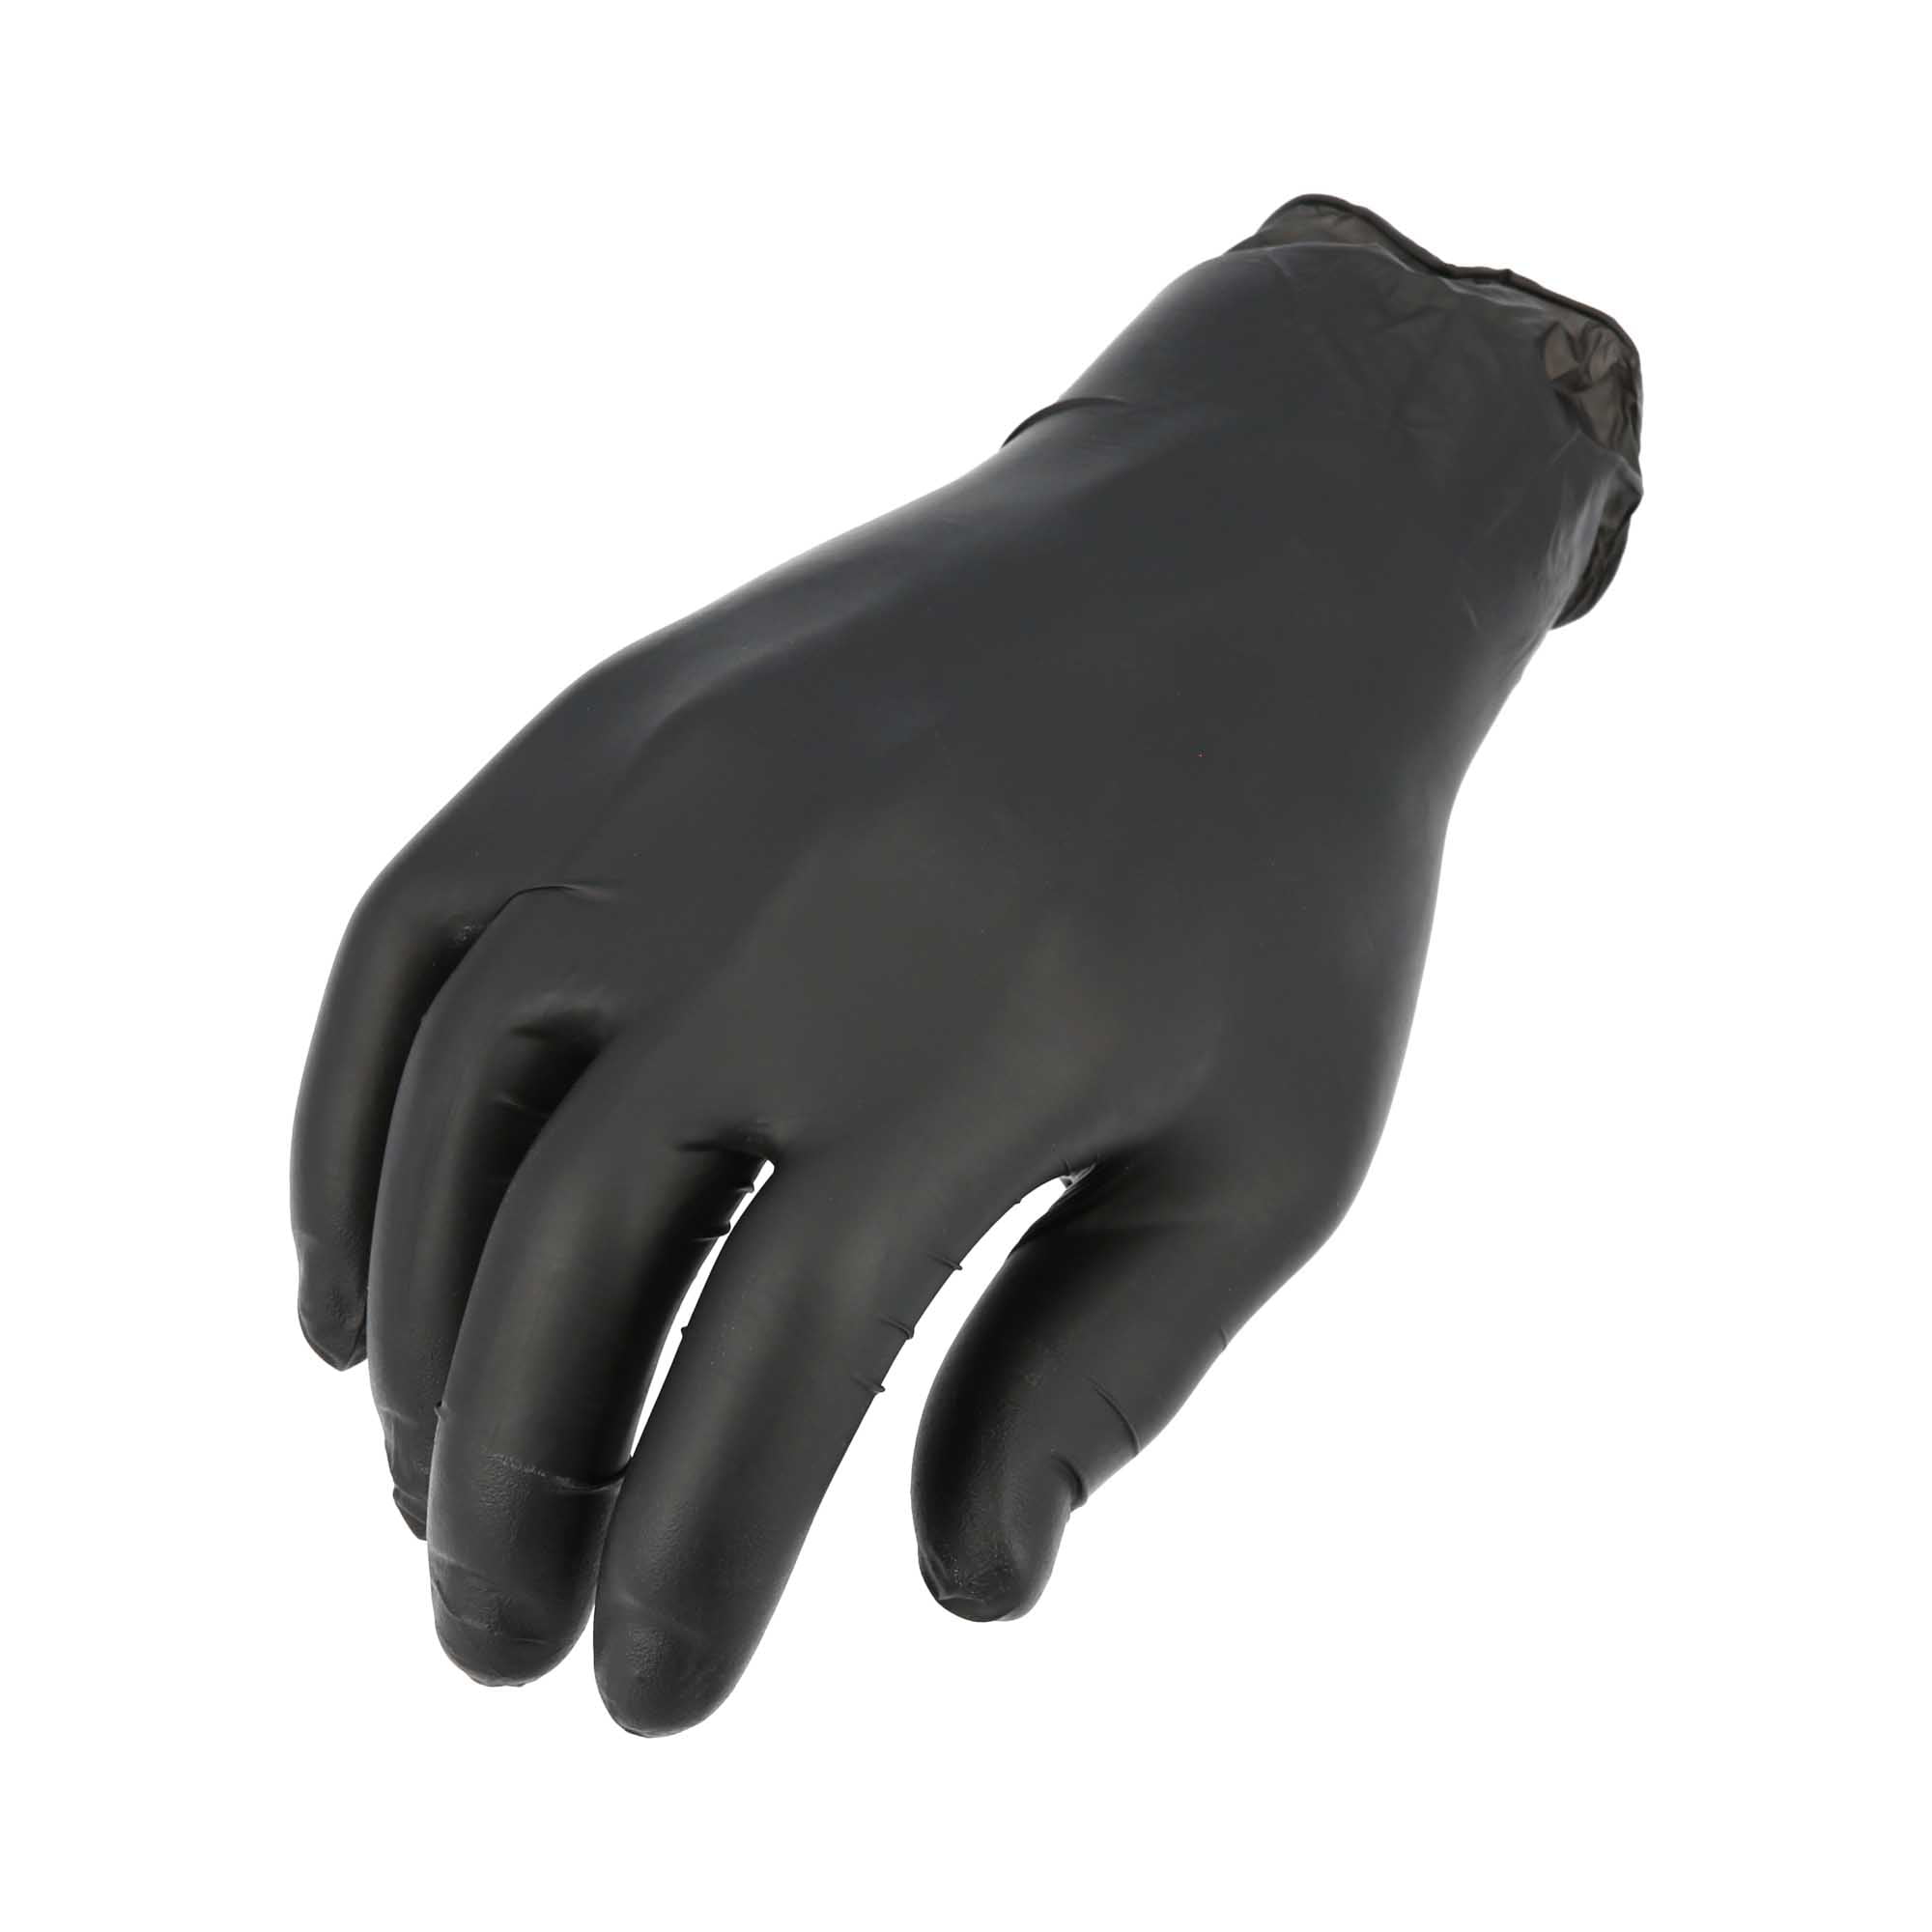 Gloves 100pcs Nitrile Black 5 MIL Thick Latex Free-heavy duty Large Size 